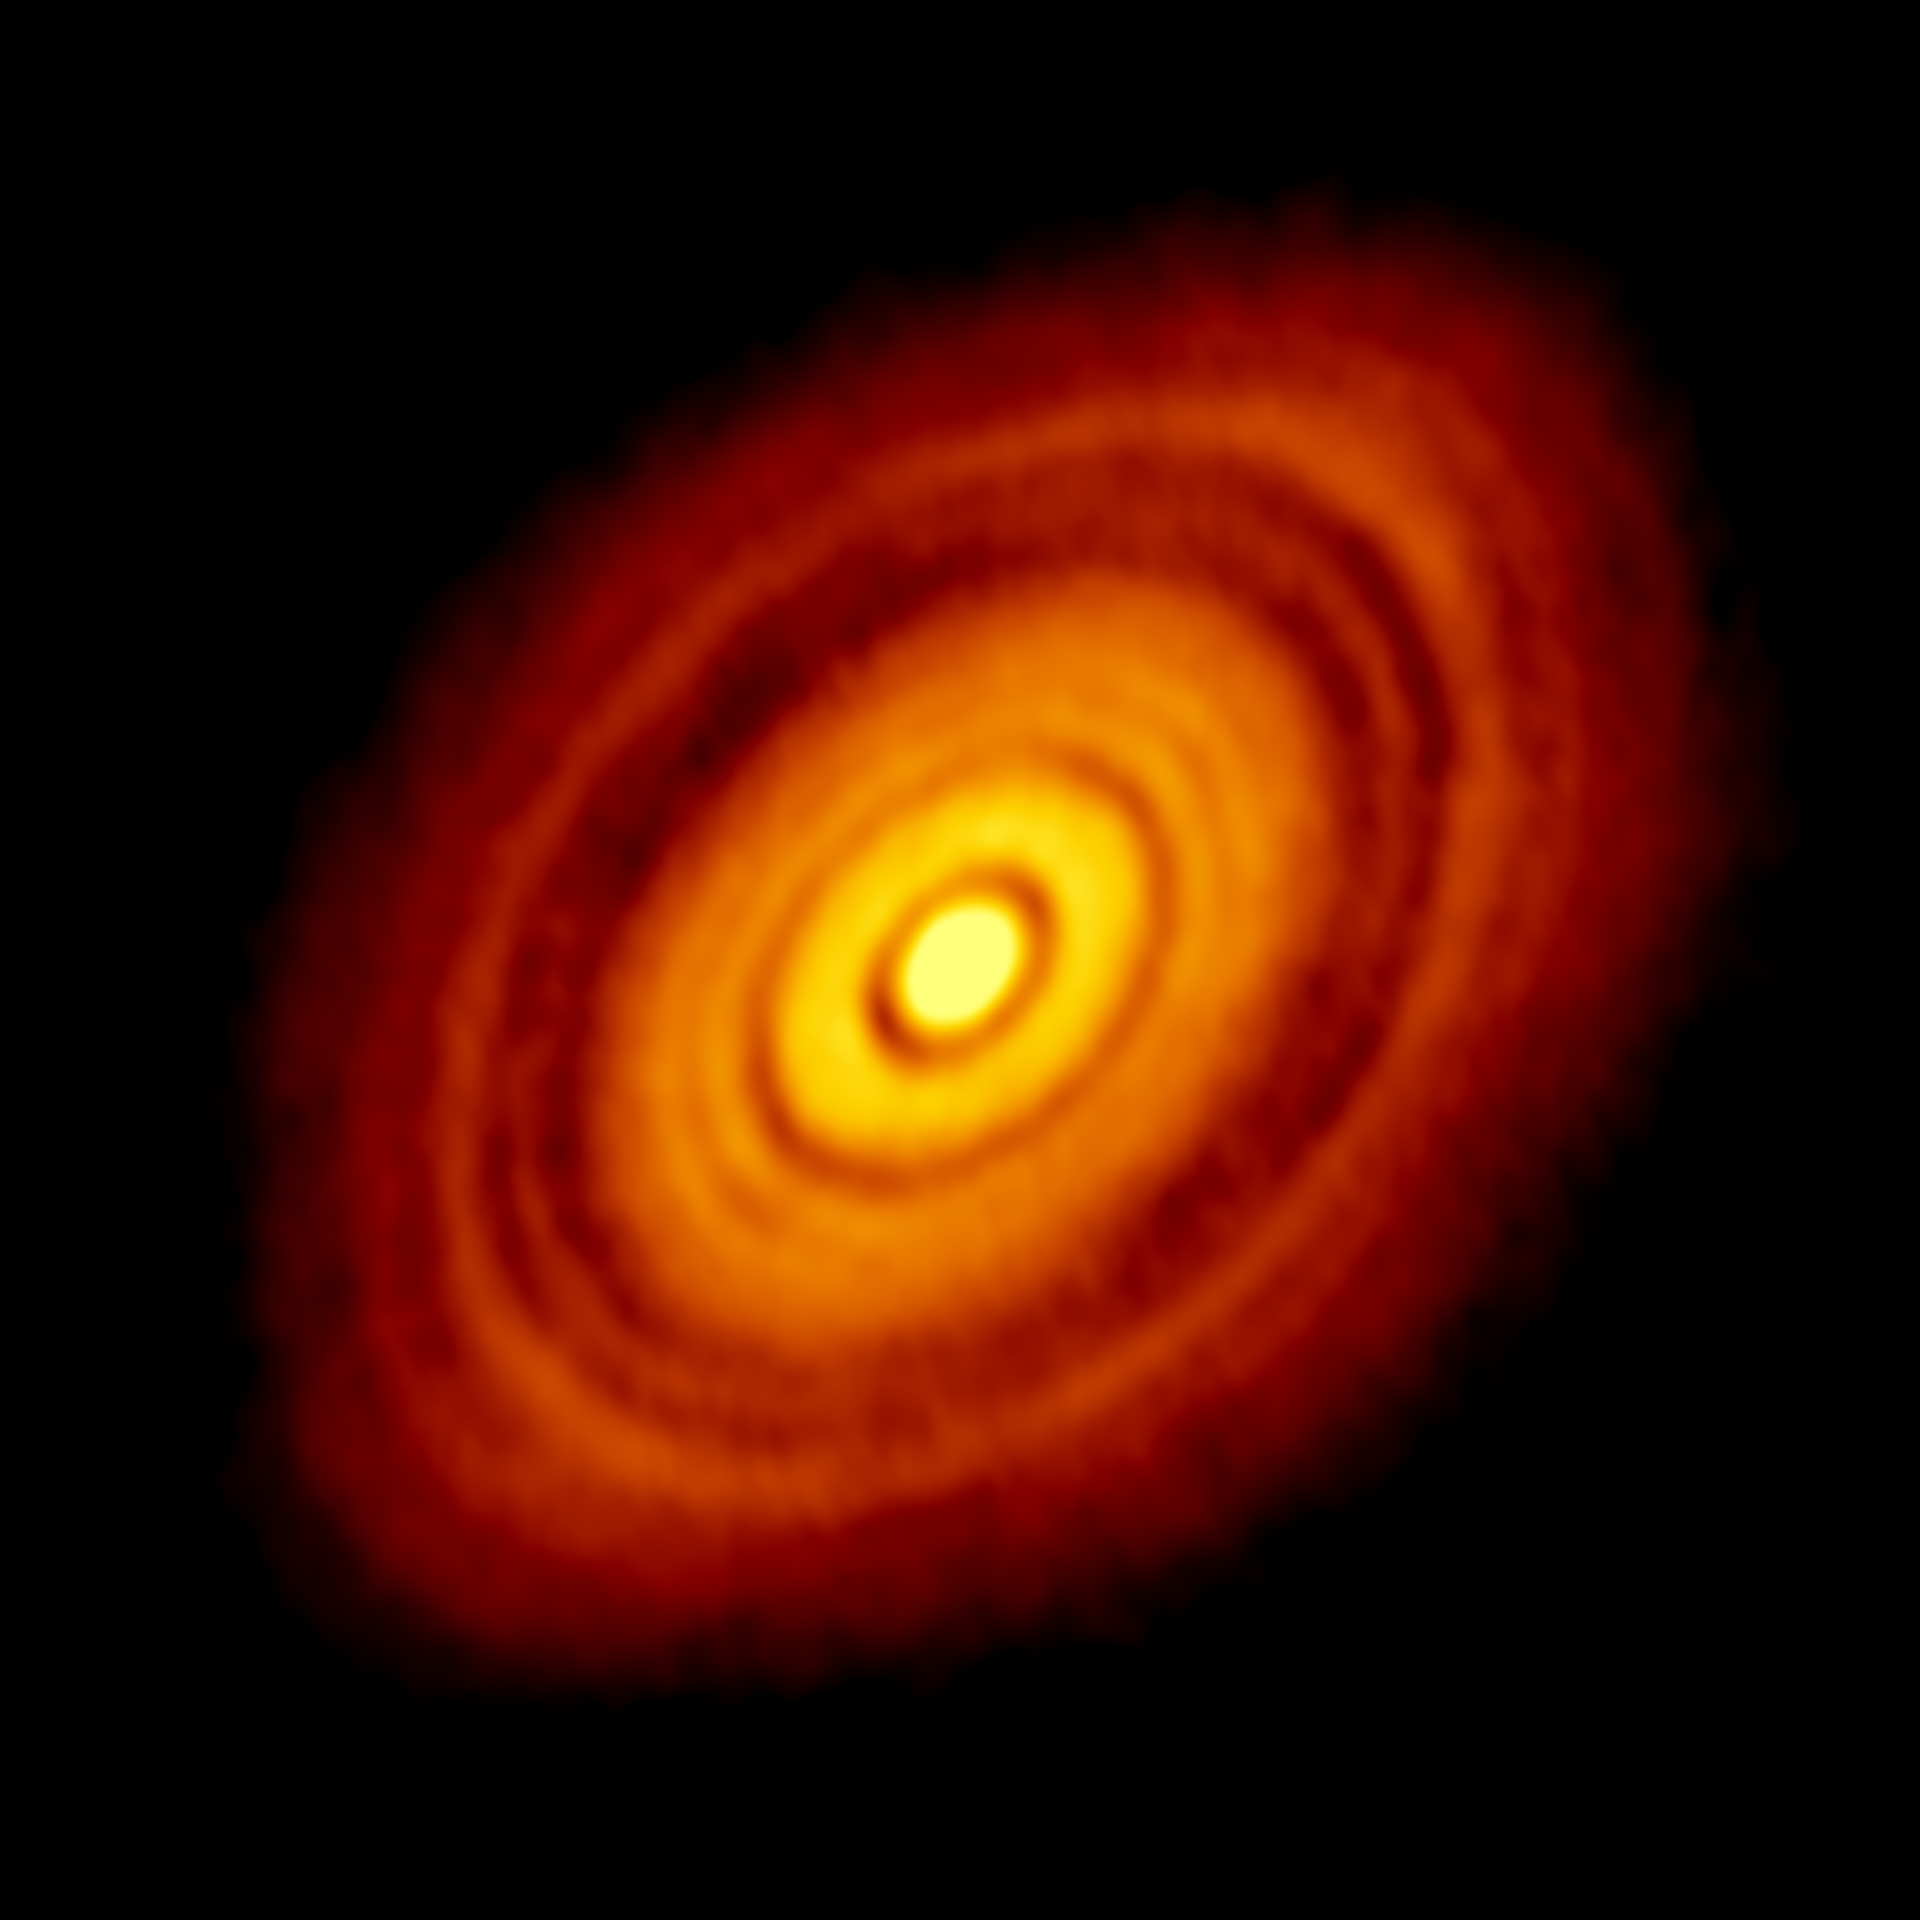 ALMA image of the young star HL Tau and its protoplanetary disk. This best image ever of planet formation reveals multiple rings and gaps that herald the presence of emerging planets as they sweep their orbits clear of dust and gas. Credit: ALMA(ESO/NAOJ/NRAO); C. Brogan, B. Saxton (NRAO/AUI/NSF)